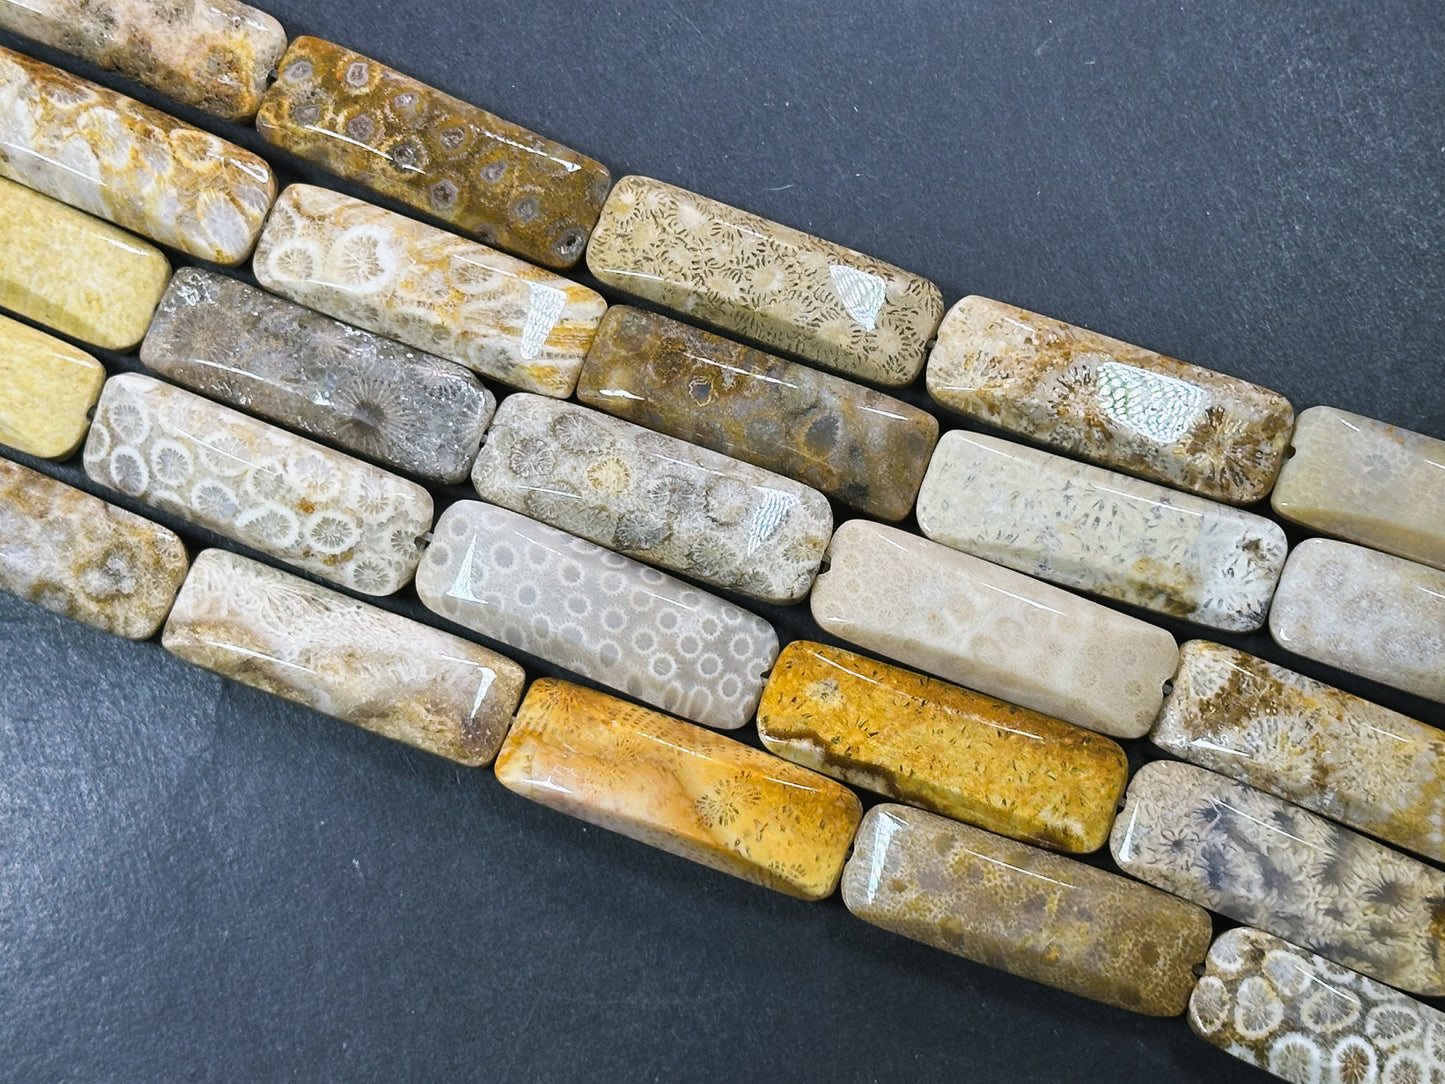 Natural Fossil Coral Gemstone Bead Faceted 39x14mm Rectangle Shape, Beautiful Natural Beige Orange Color Fossil Coral Bead Full Strand 15.5"